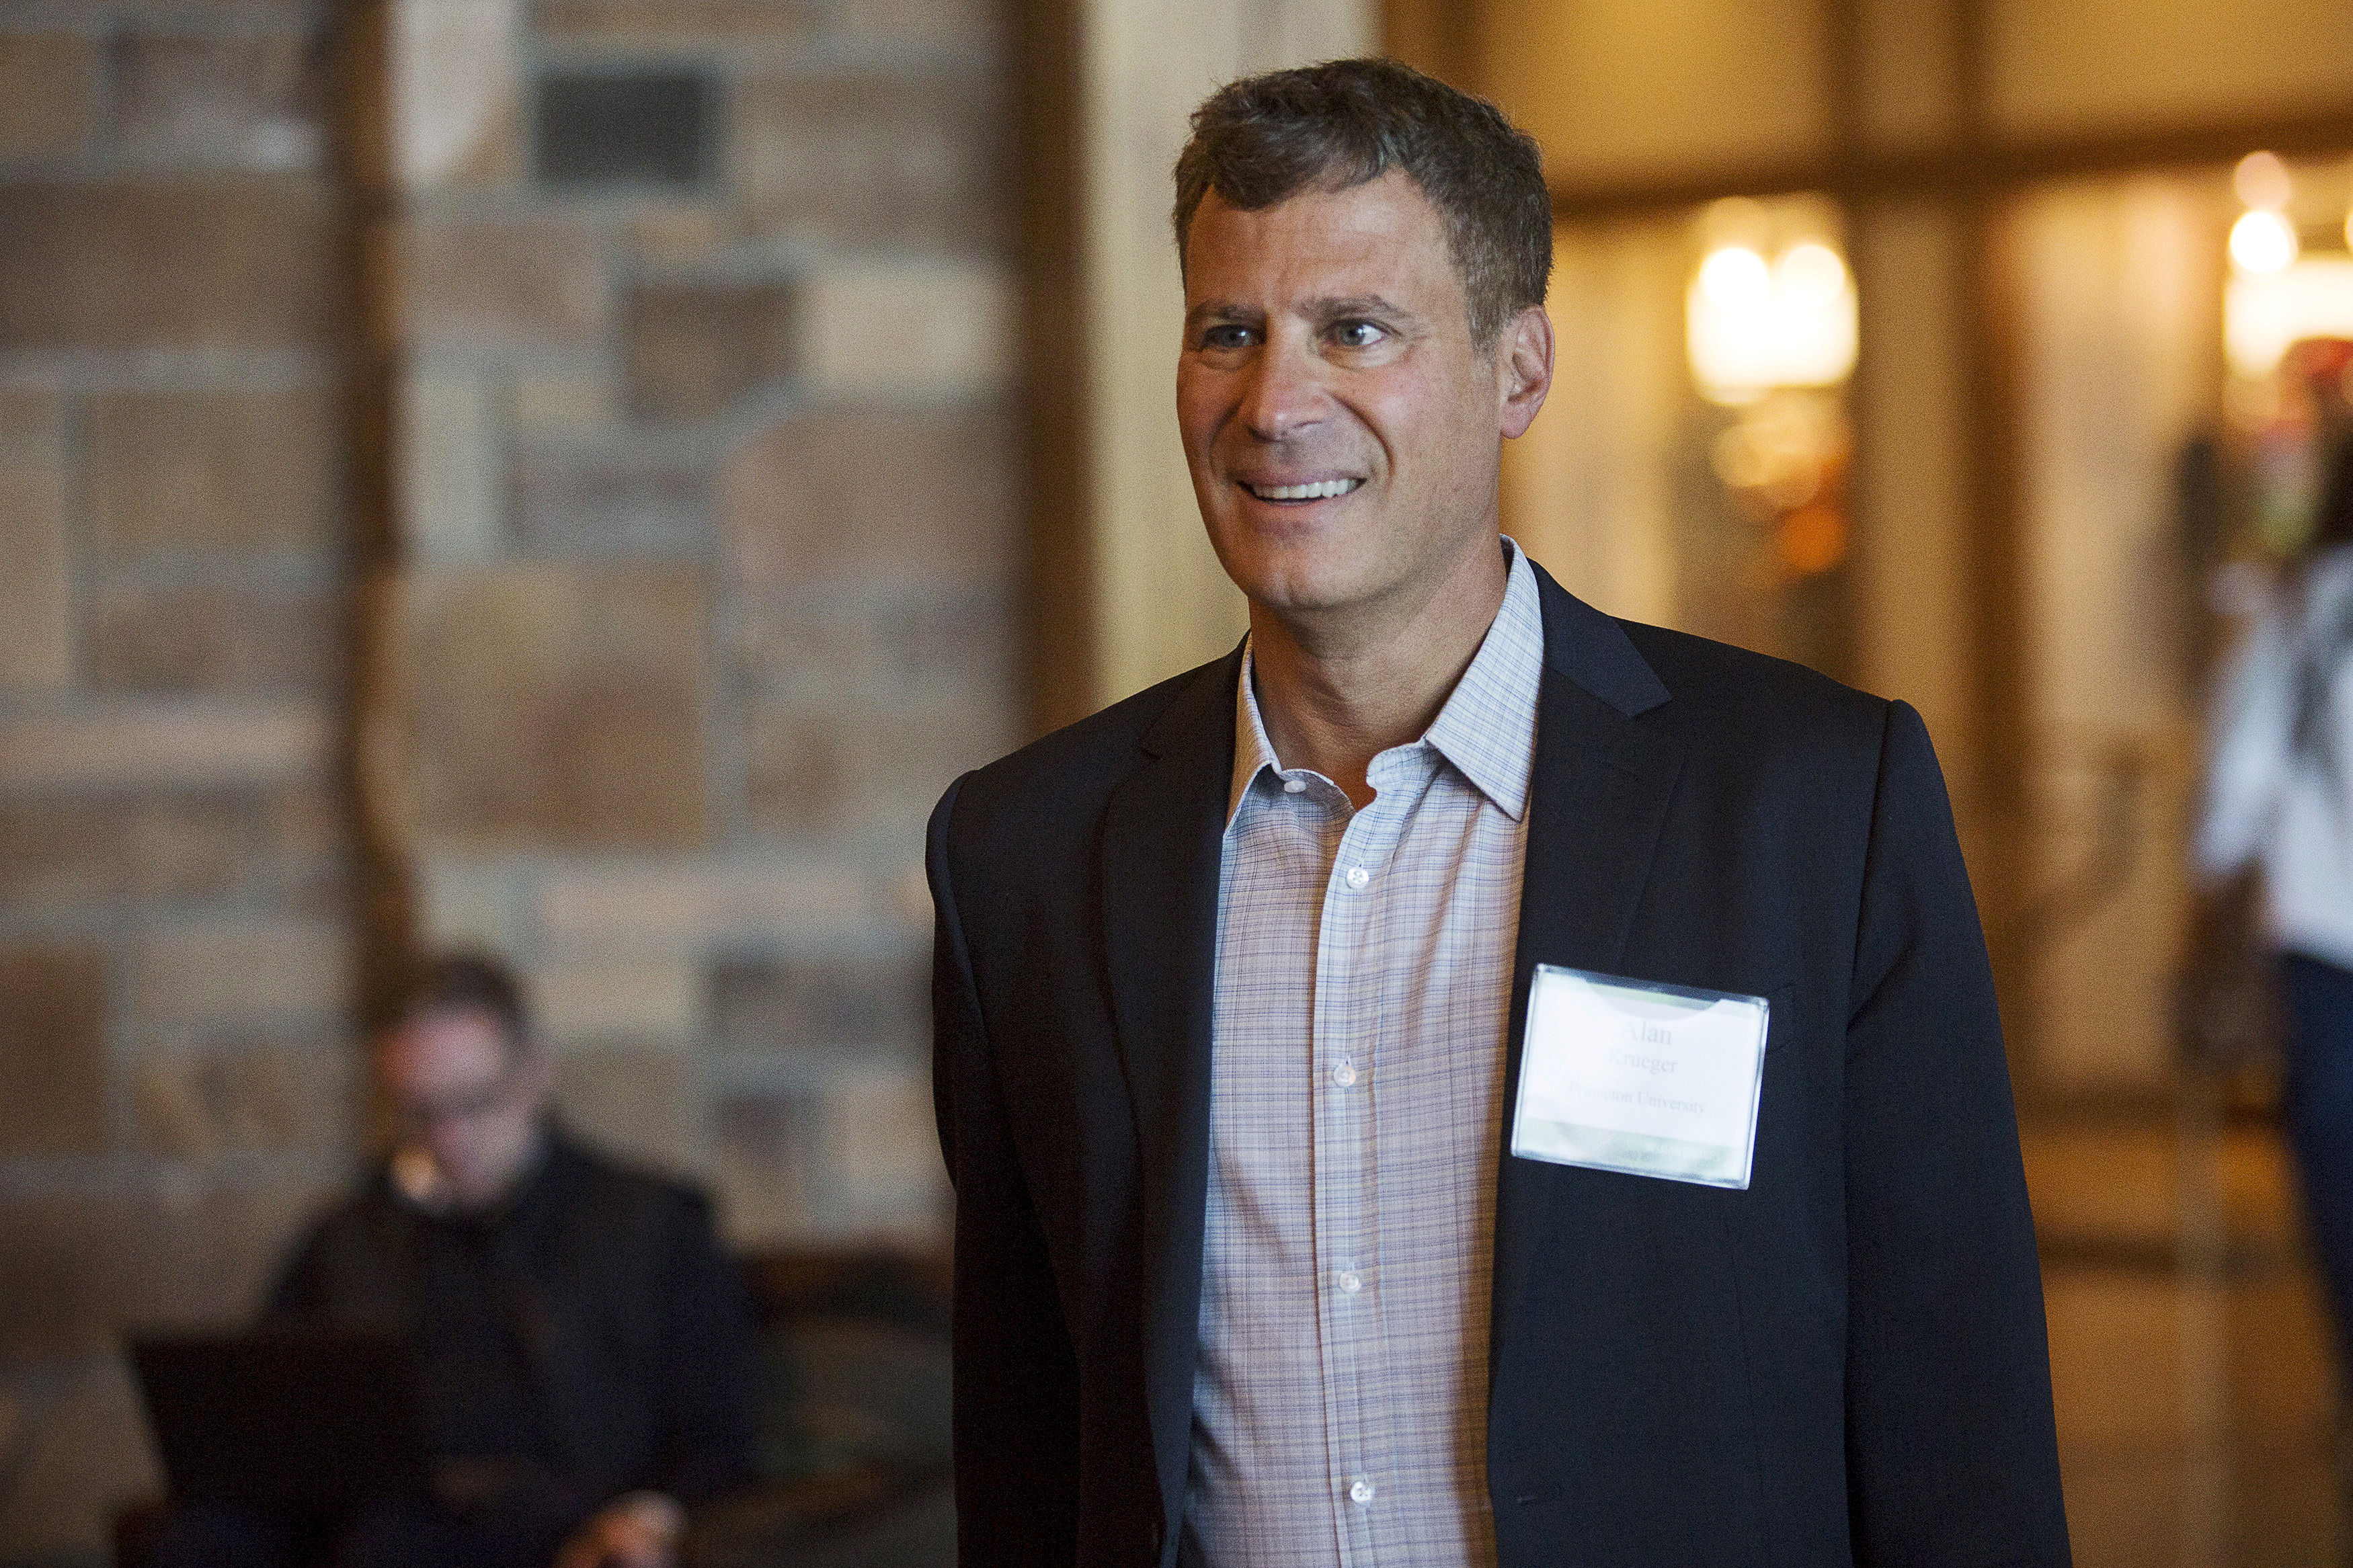 Highlights: Alan Krueger's impact on economics and public policy | Brookings